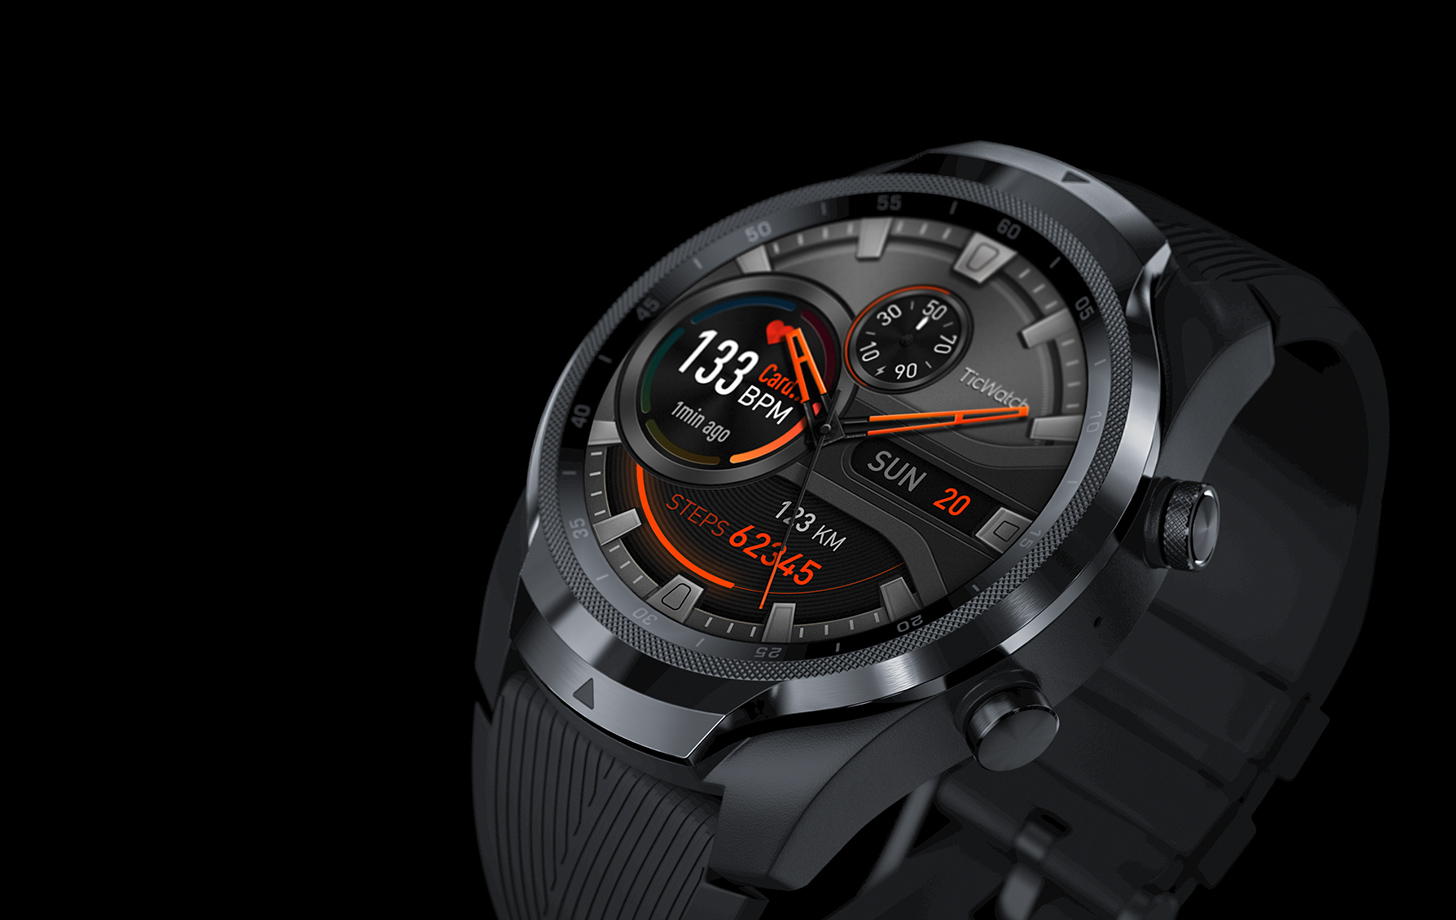 TicWatch Pro 4G/LTE is a Wear OS watch with builtin cellular, and it's